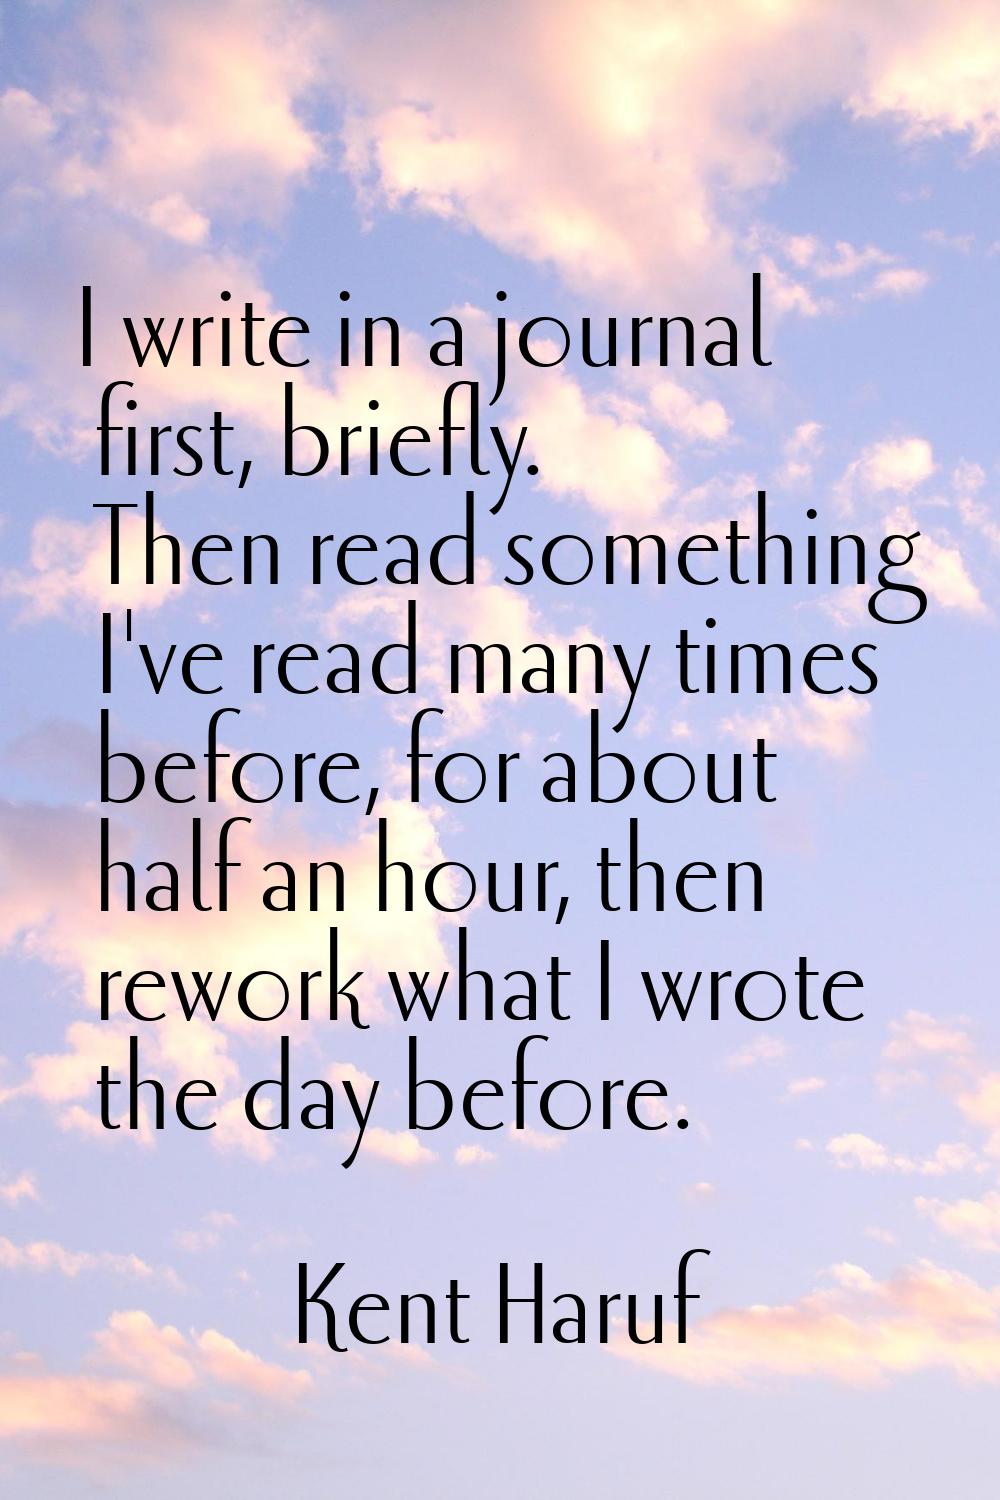 I write in a journal first, briefly. Then read something I've read many times before, for about hal